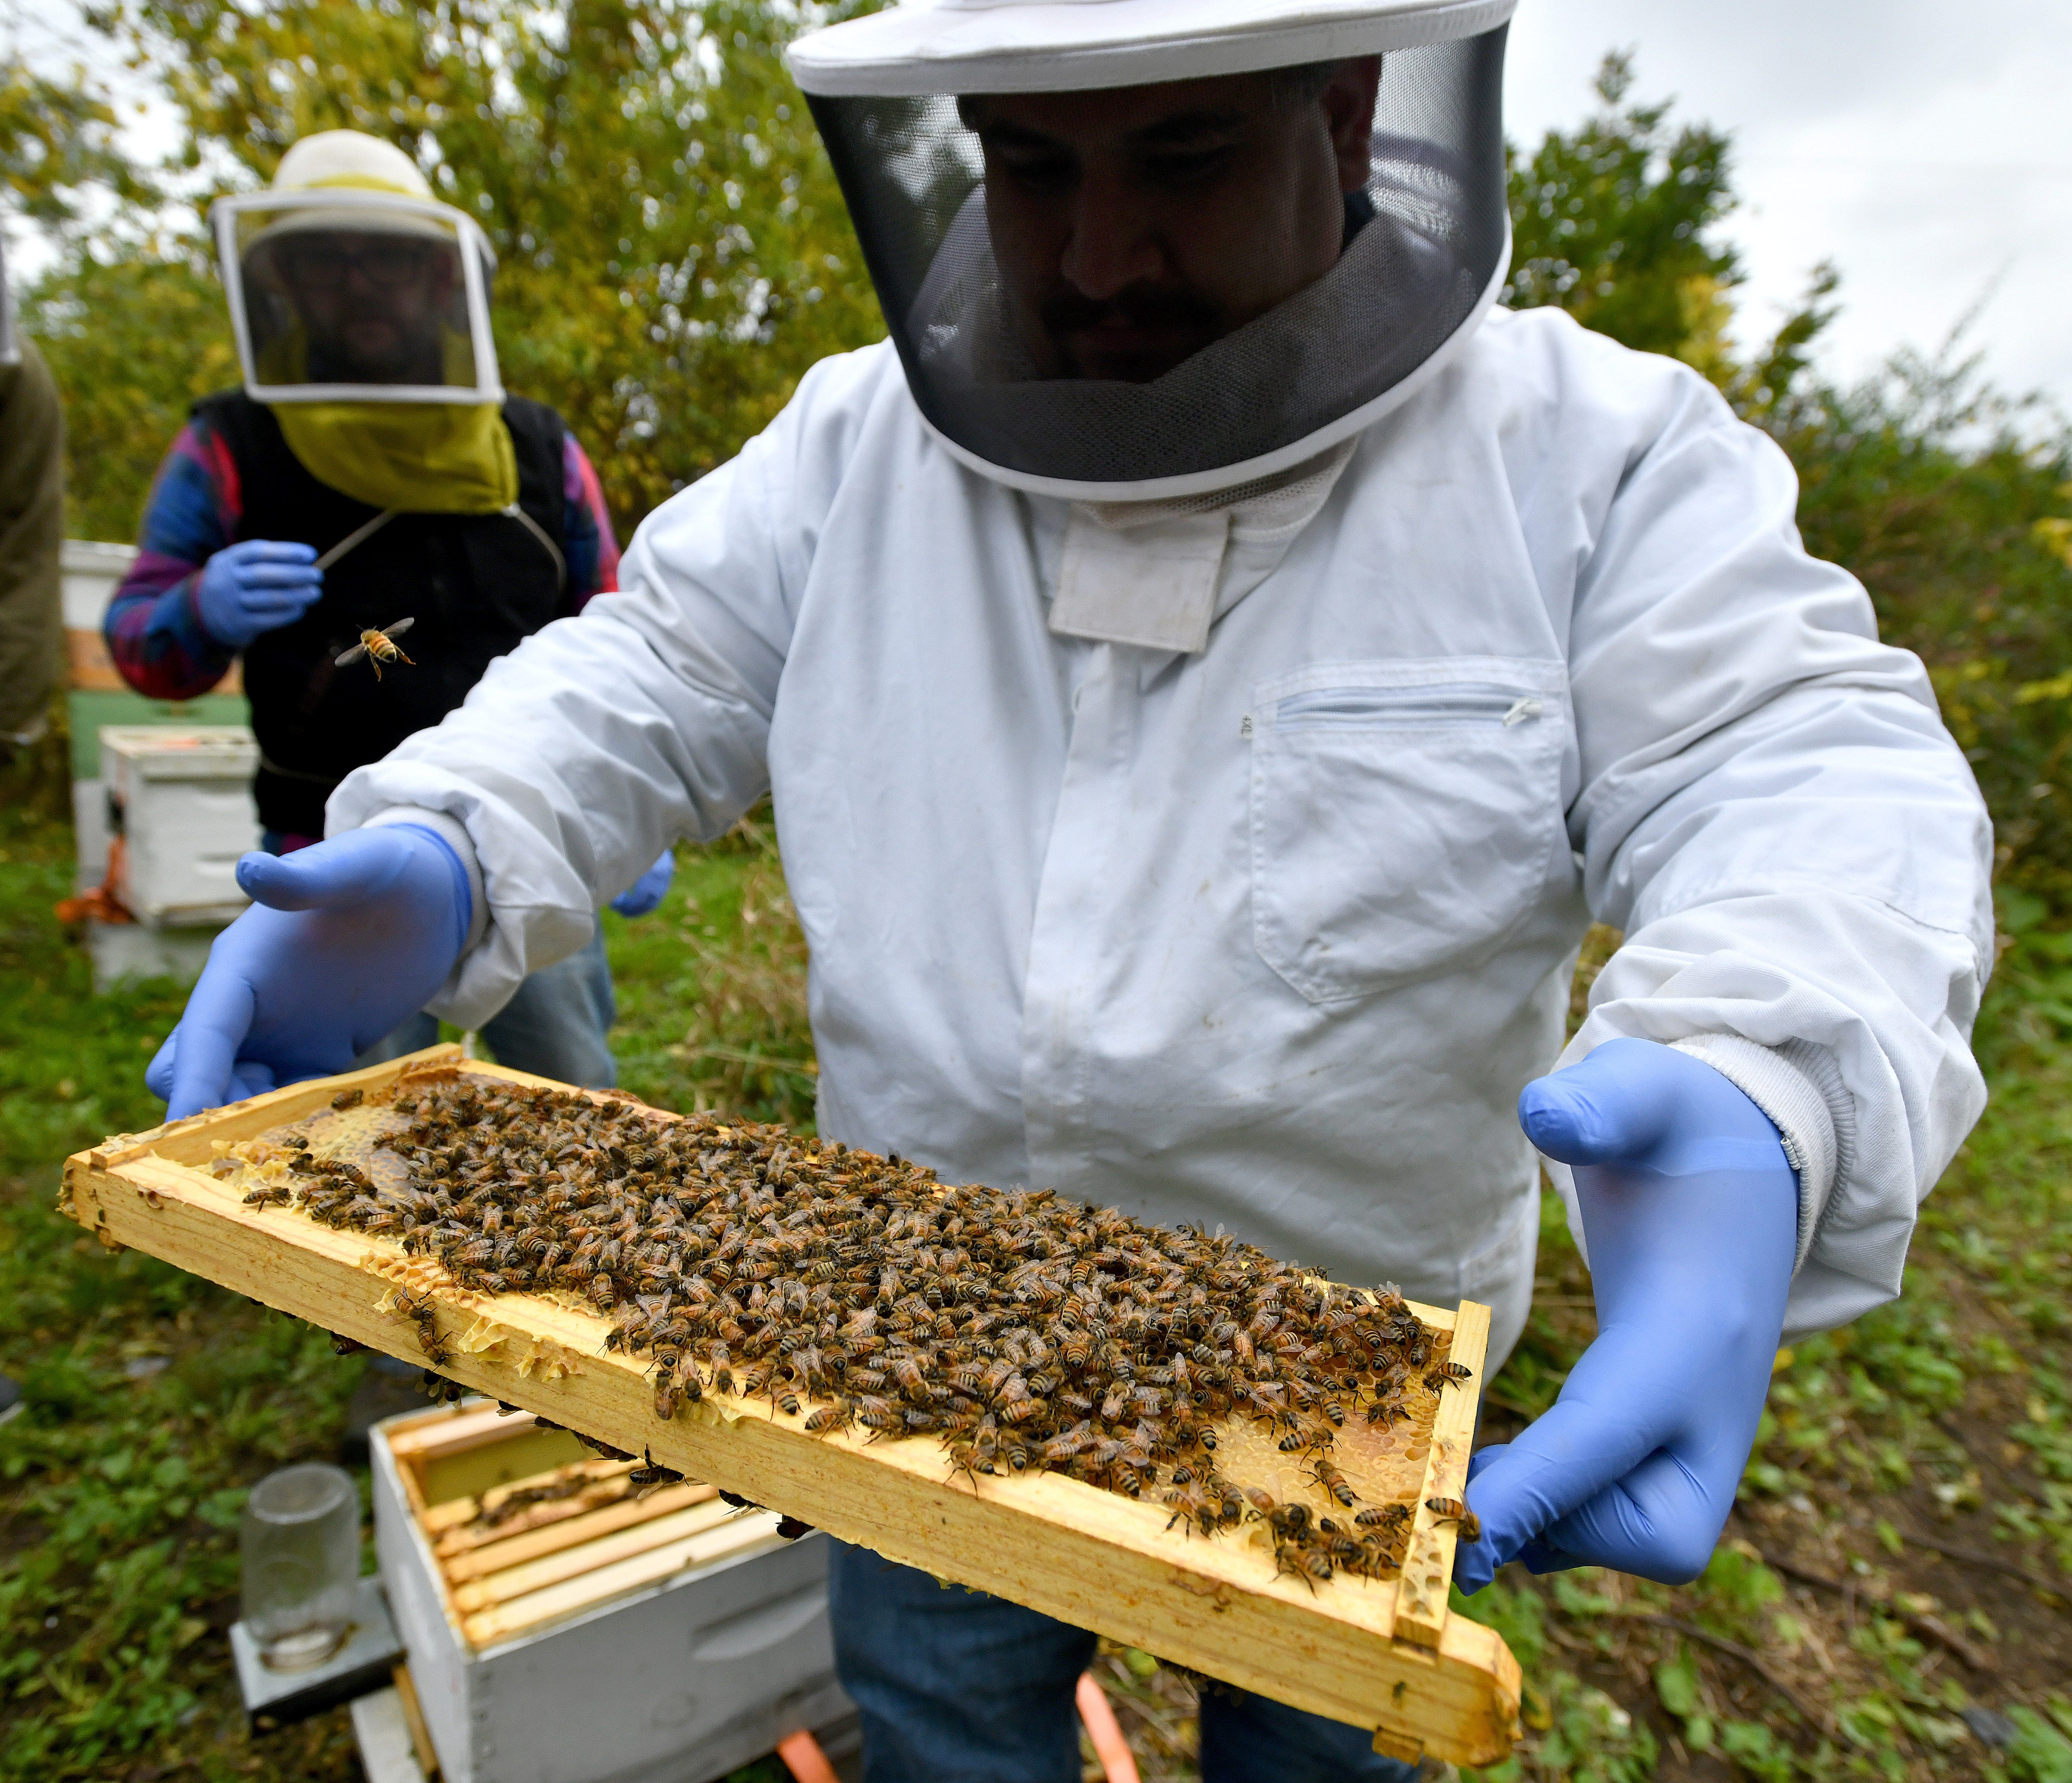 Tom Kusar, a US Marine Corps veteran holds a frame, removed from a hive box that is covered with busy honey bees. Kusar is being coached by Adam Ingrao (in background,) who runs Heroes to Hives, a program that uses beekeeping as a therapeutic and entrepreneurial tool for returning veterans.